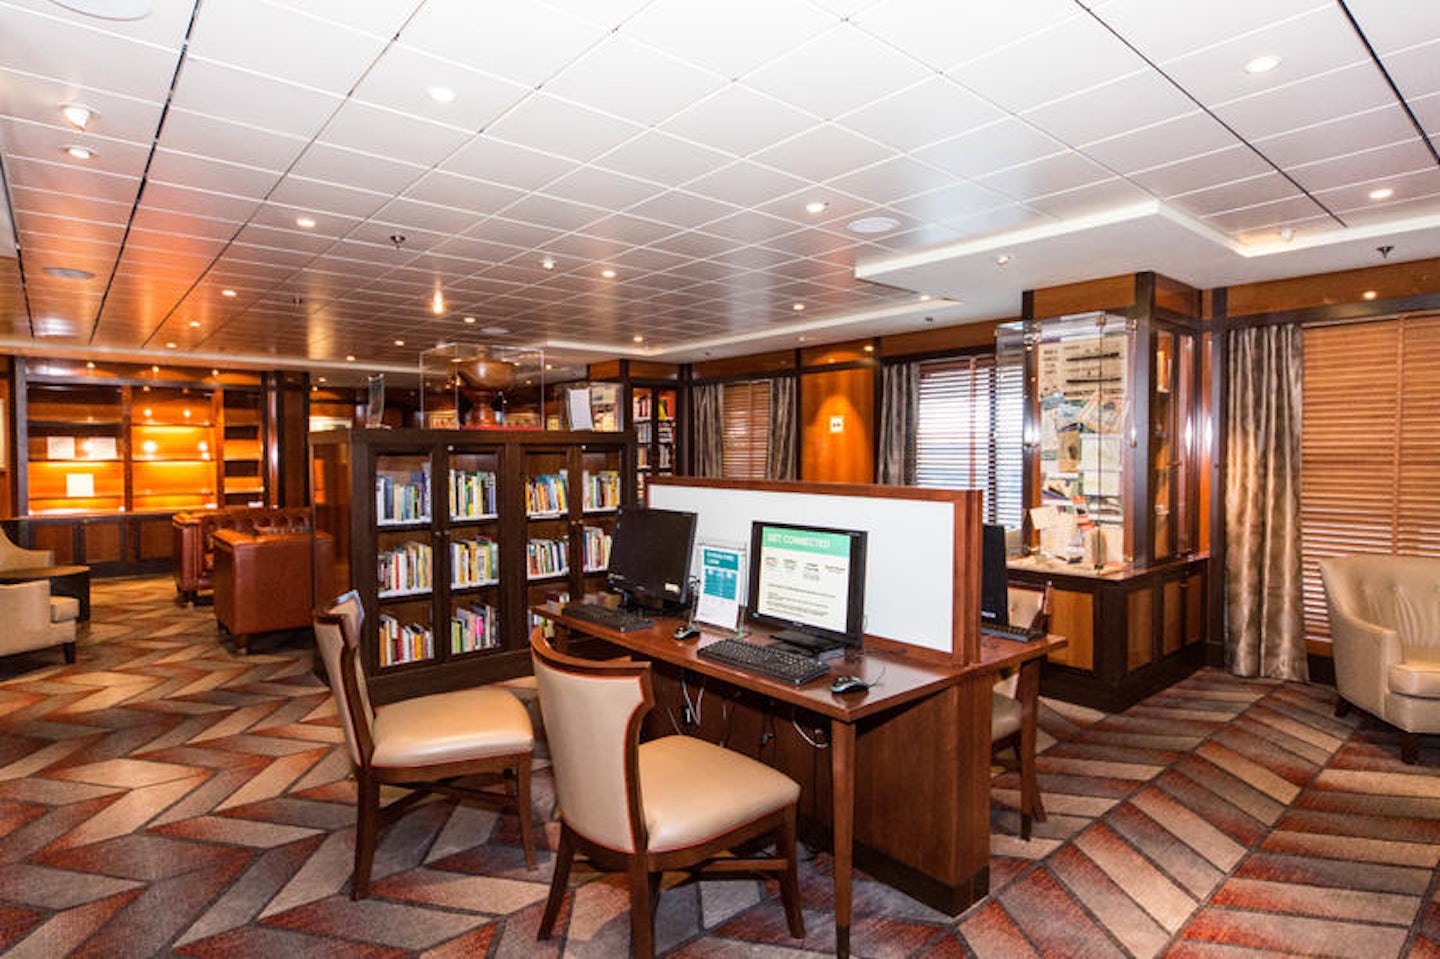 SS America Library on Pride of America